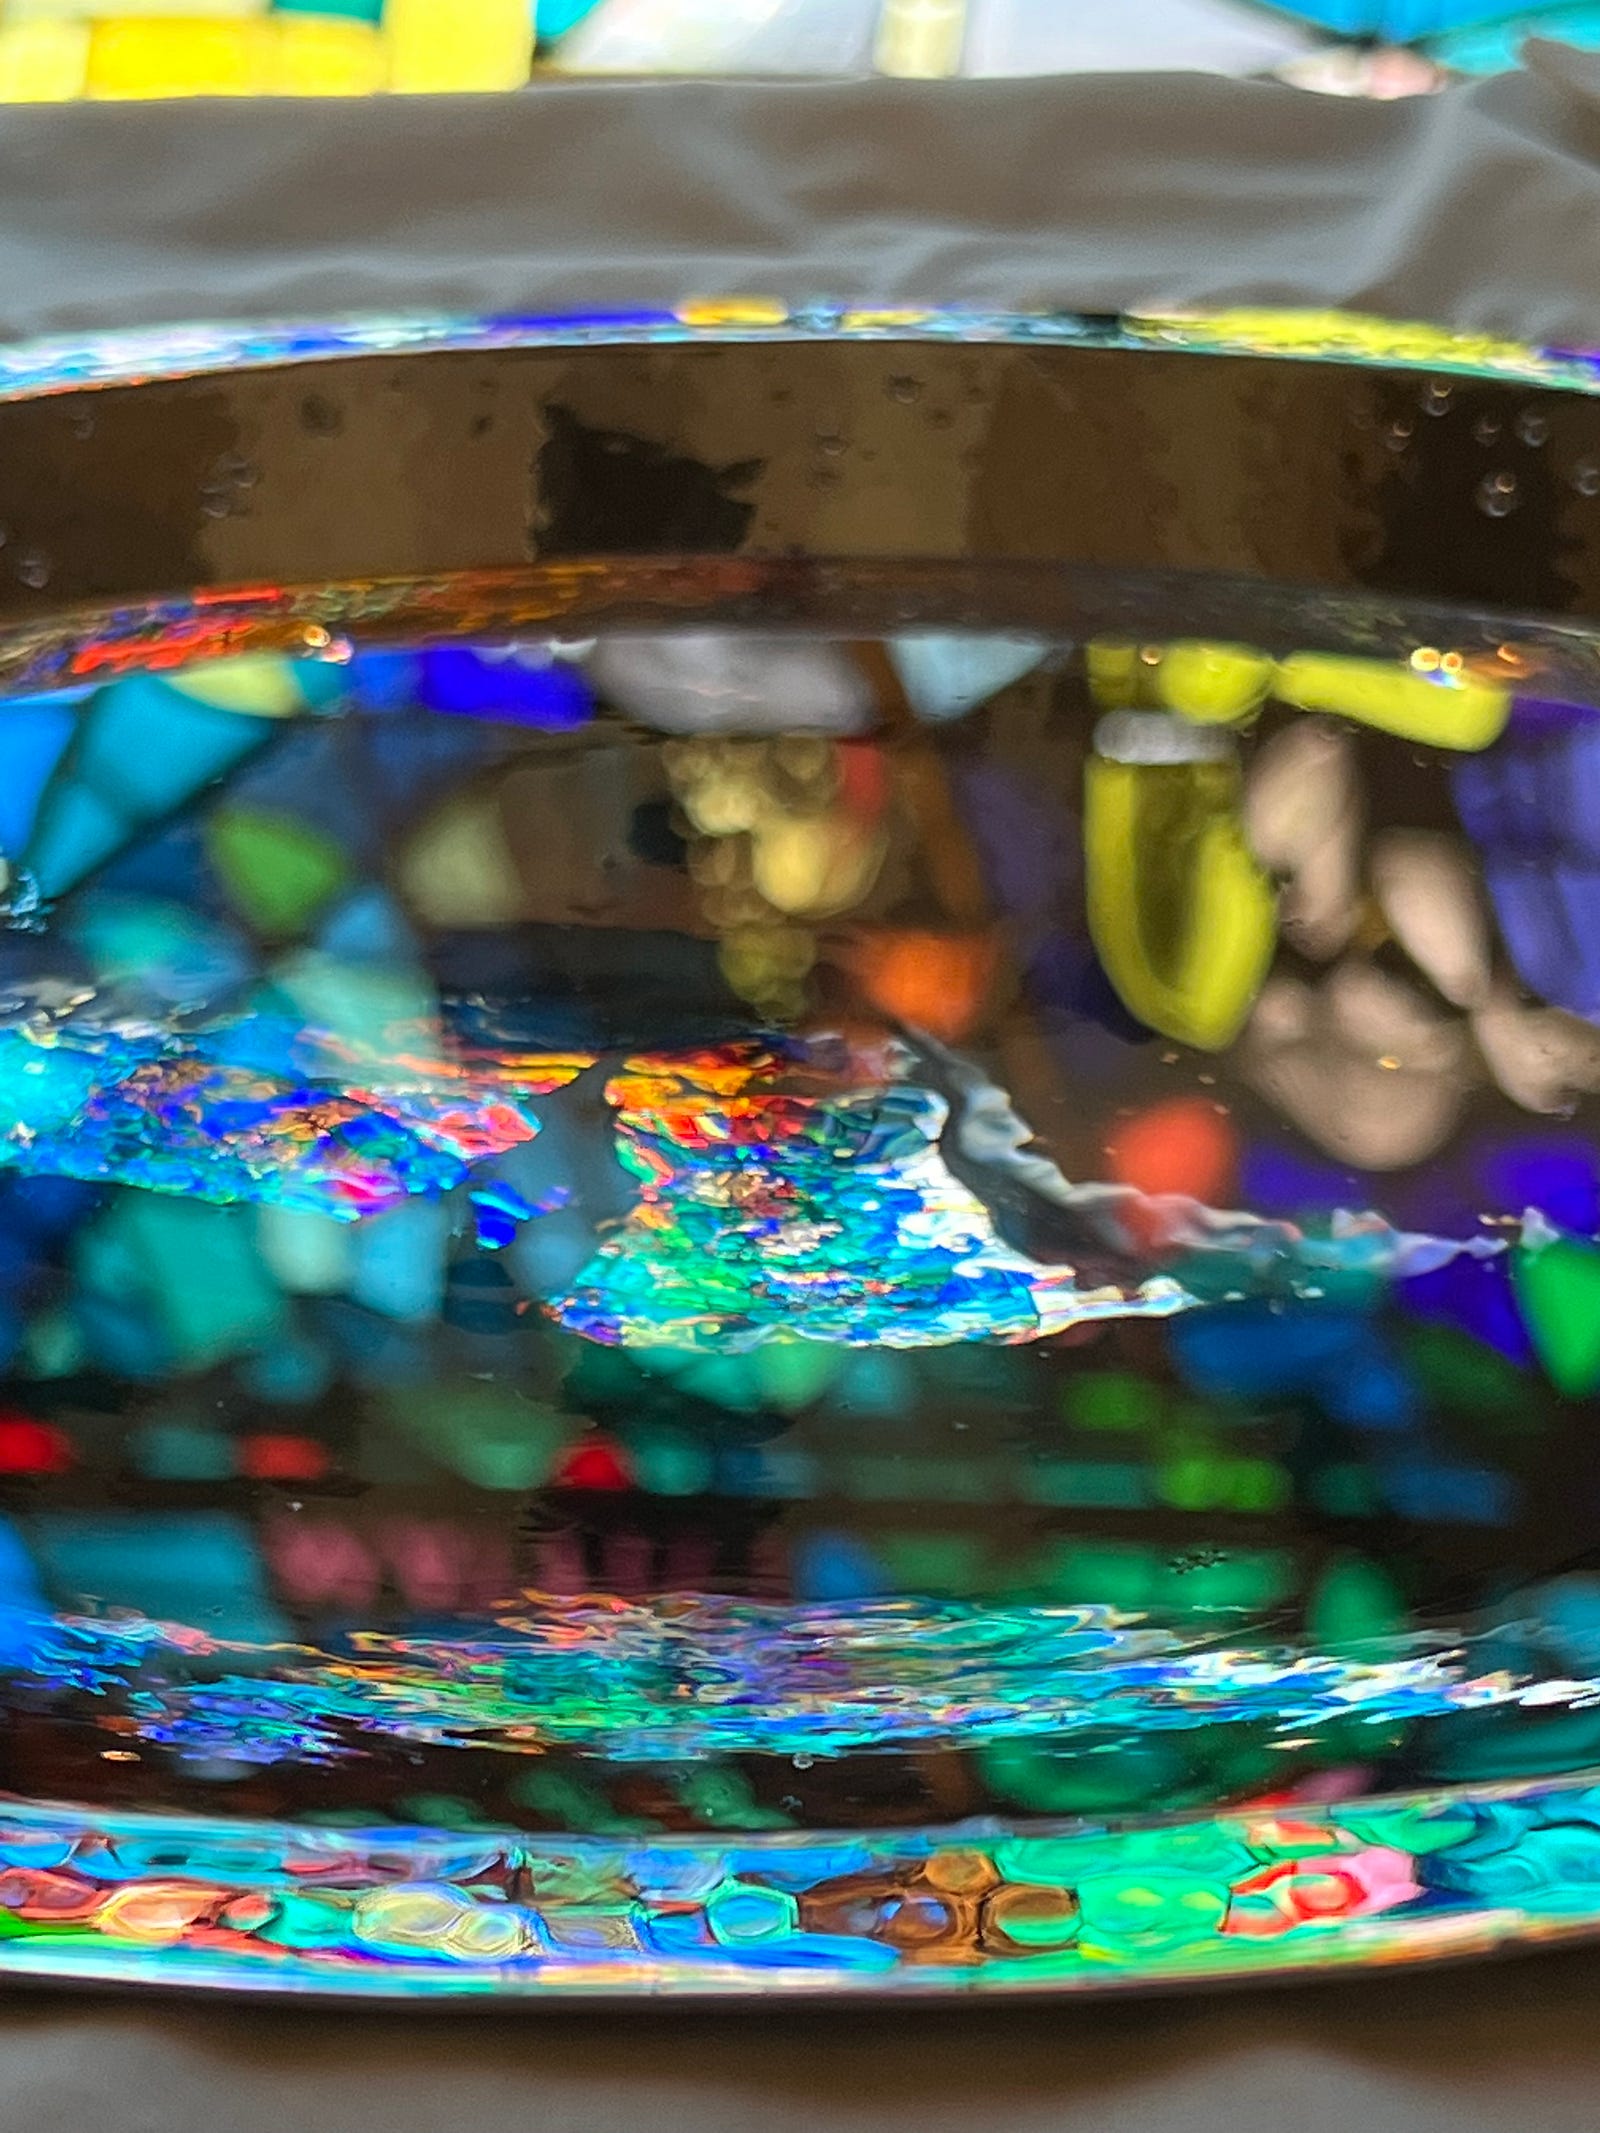 All the colors collected in the water of the baptismal font at St Andrews Madison, CT.